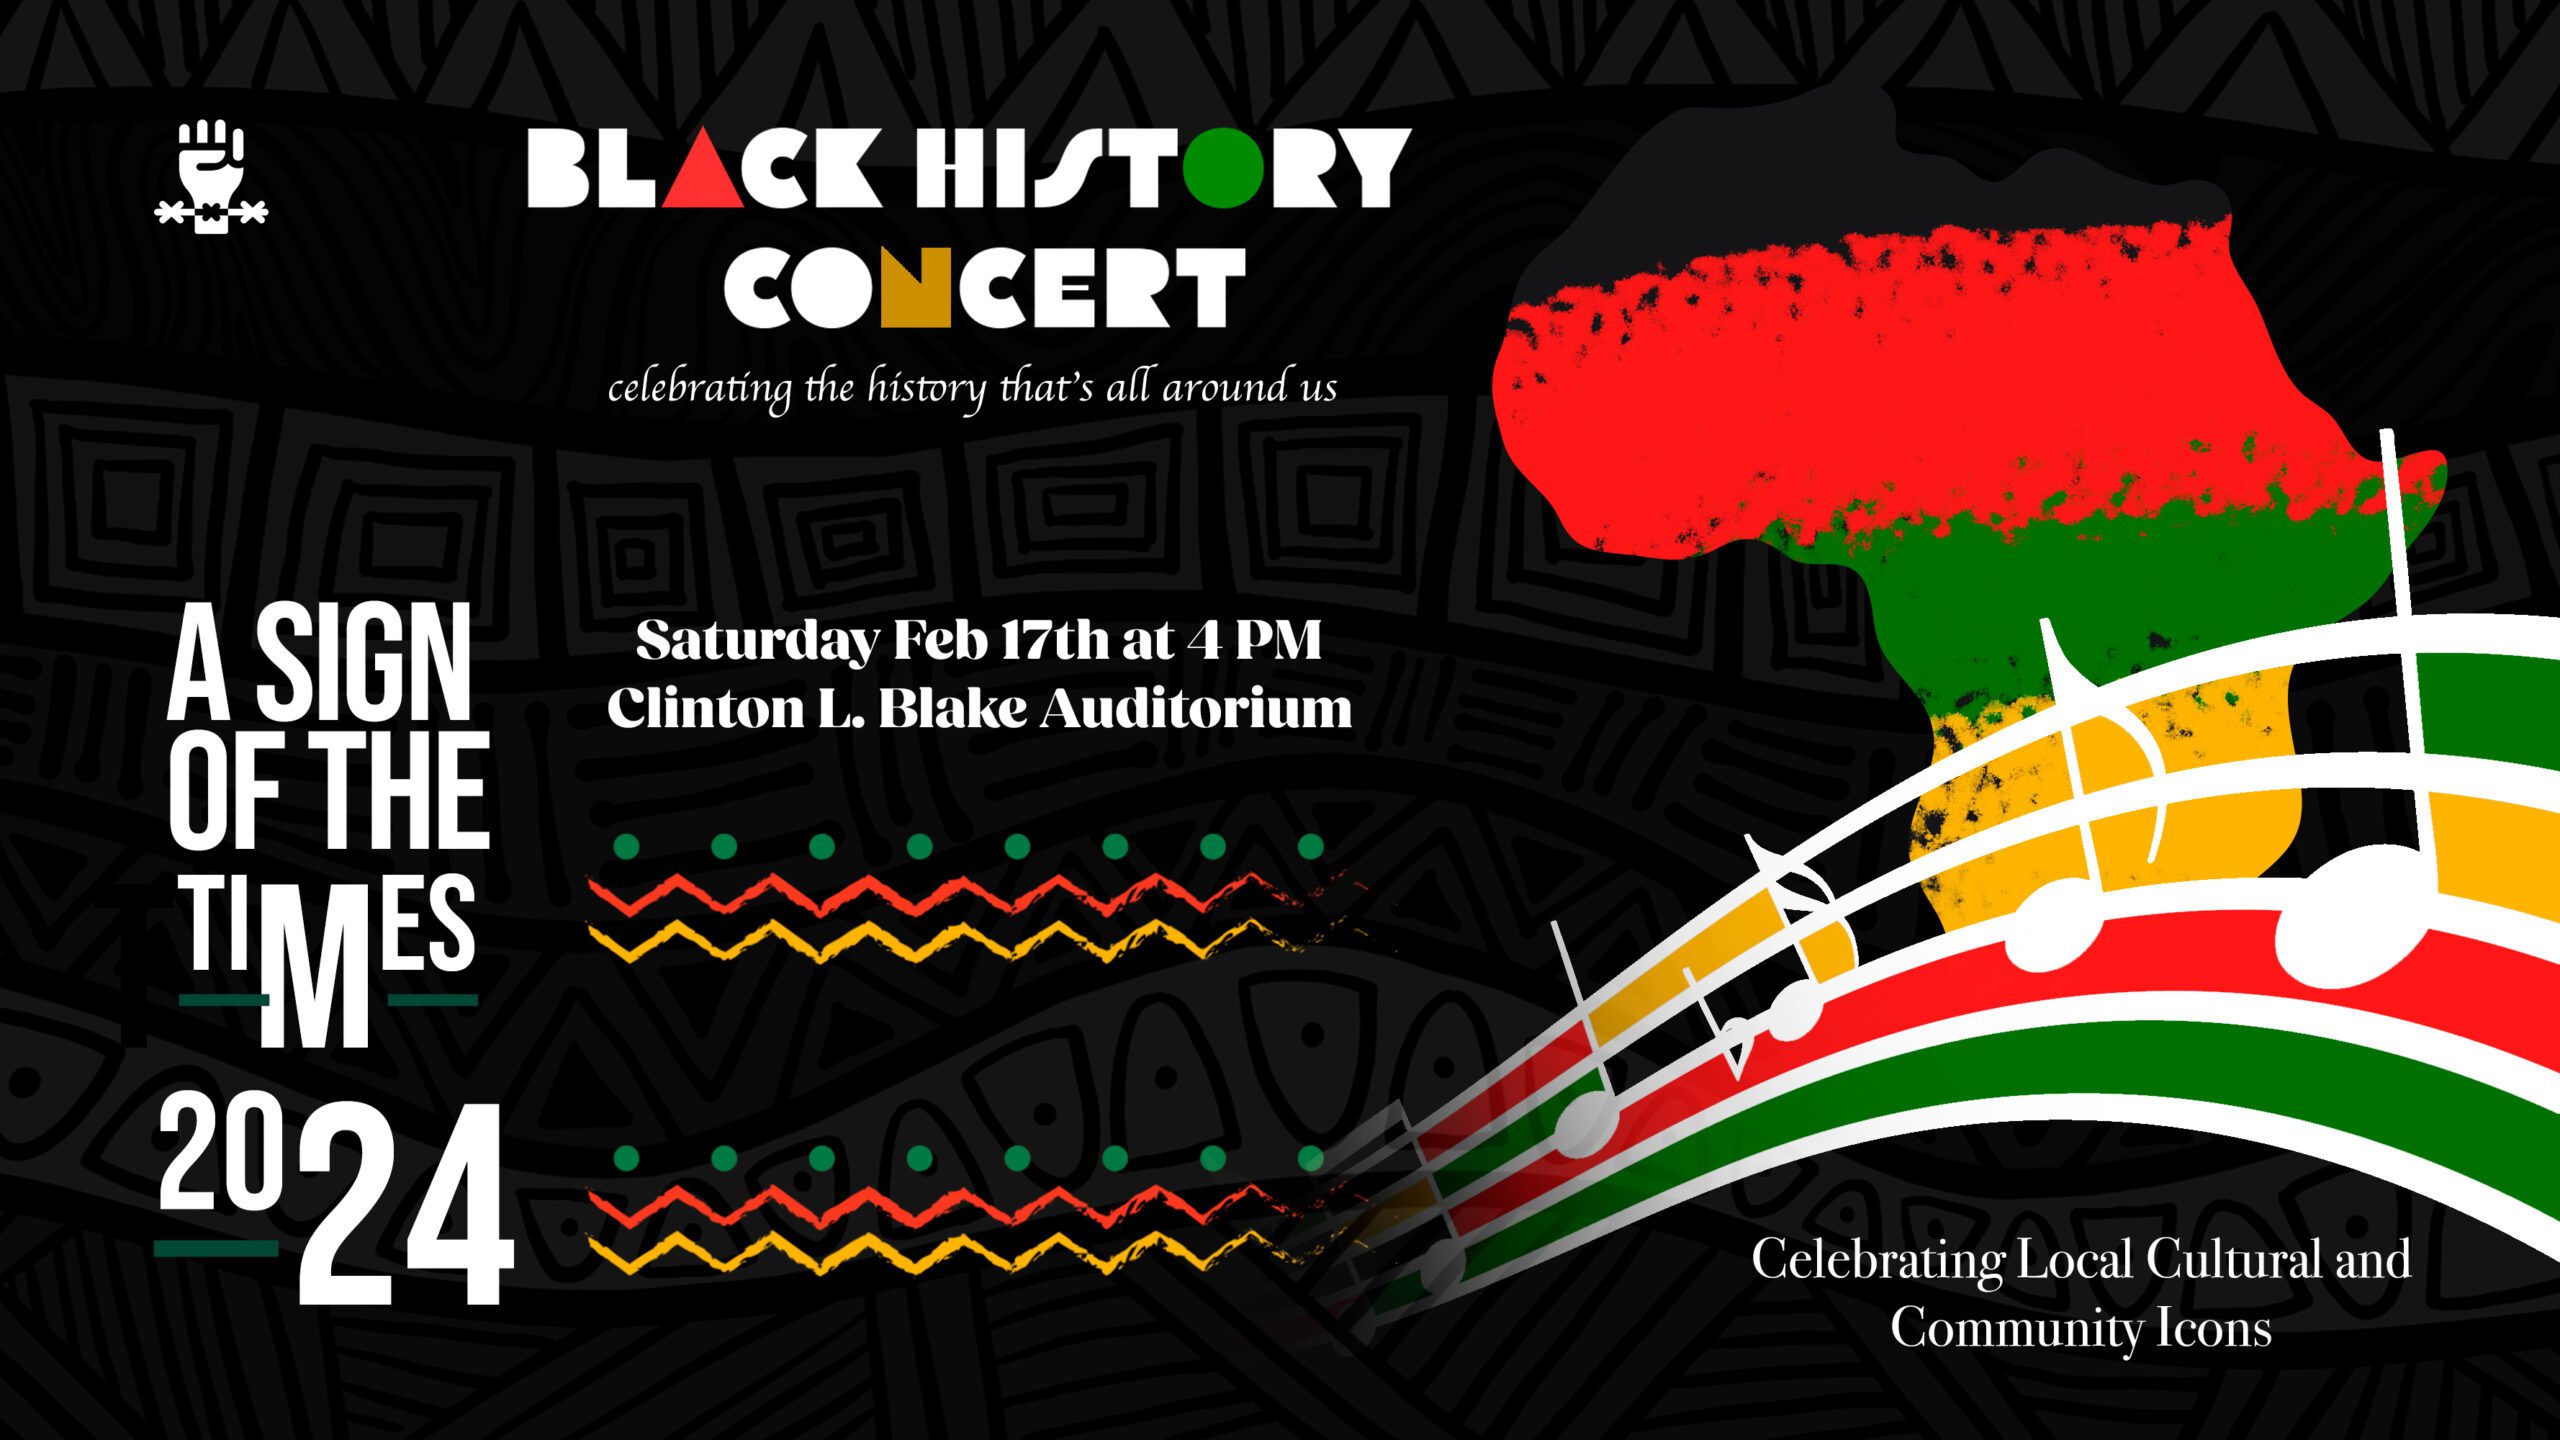 Annual Black History Concert